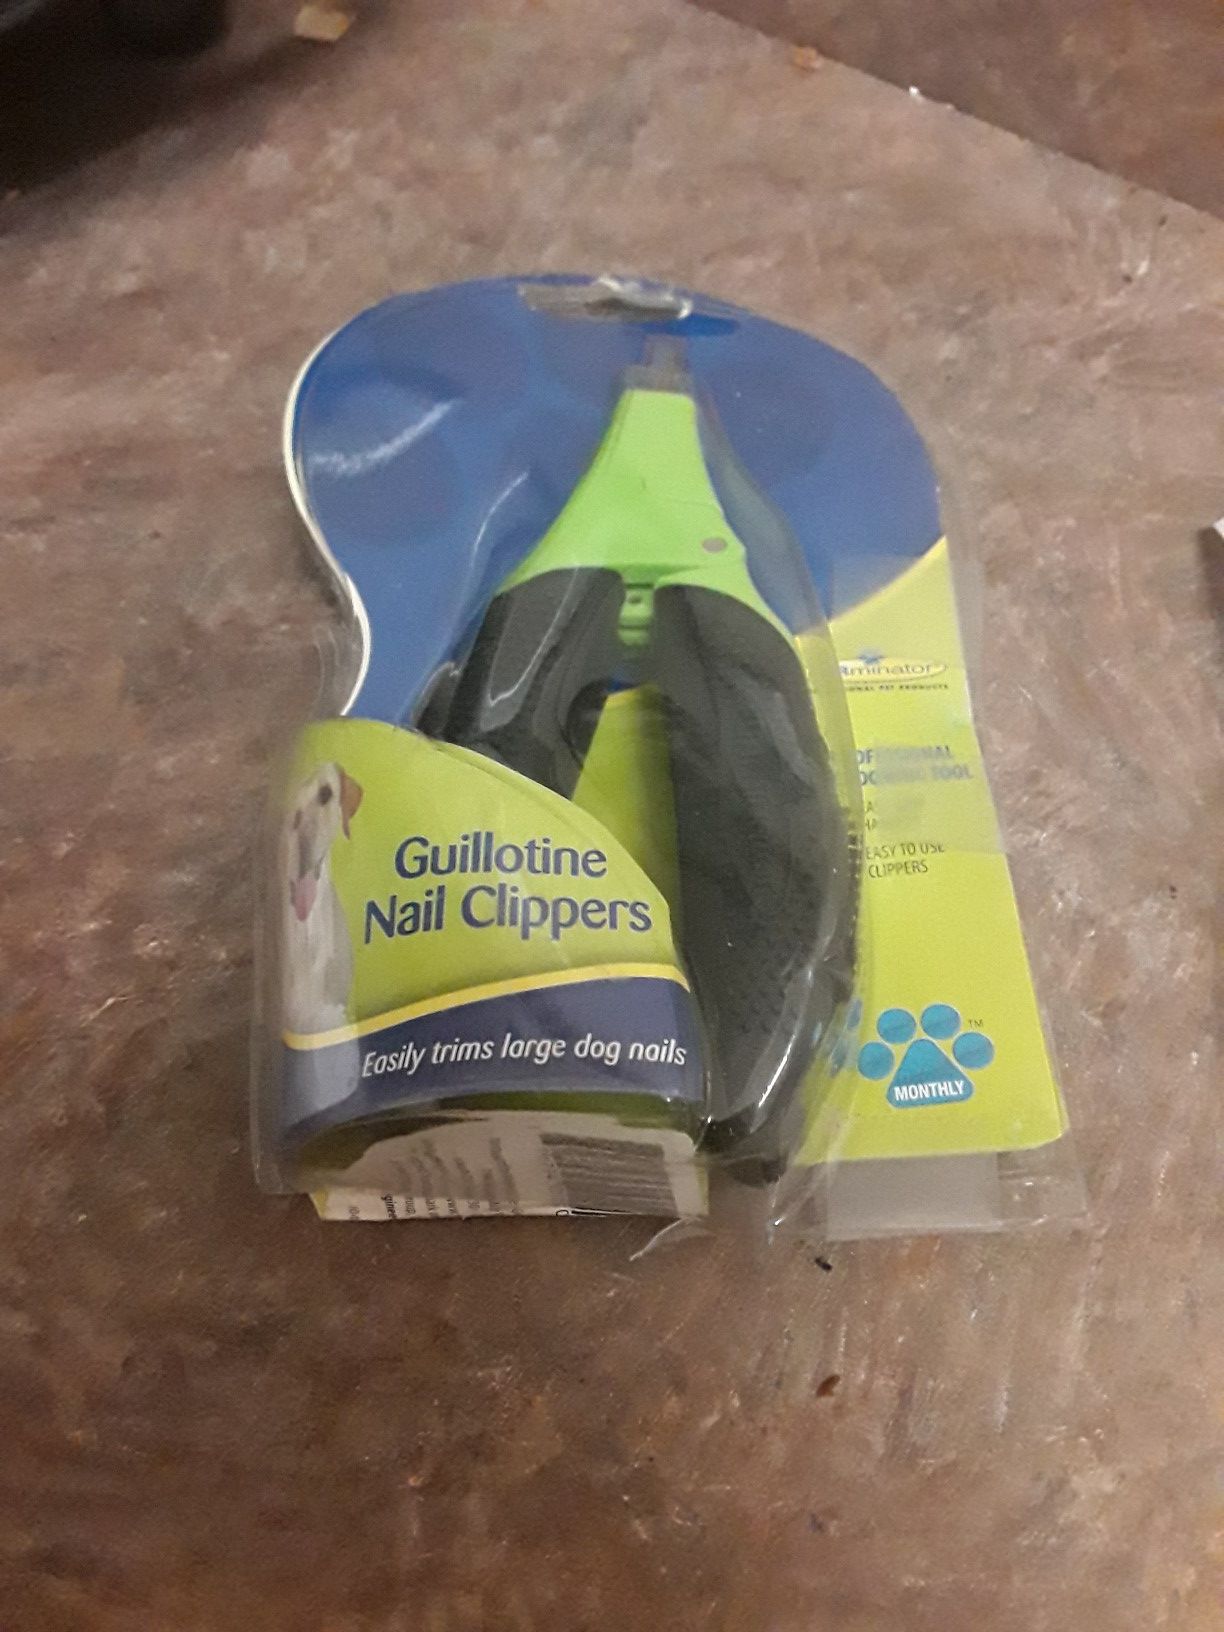 Guillotine nail clippers for pets